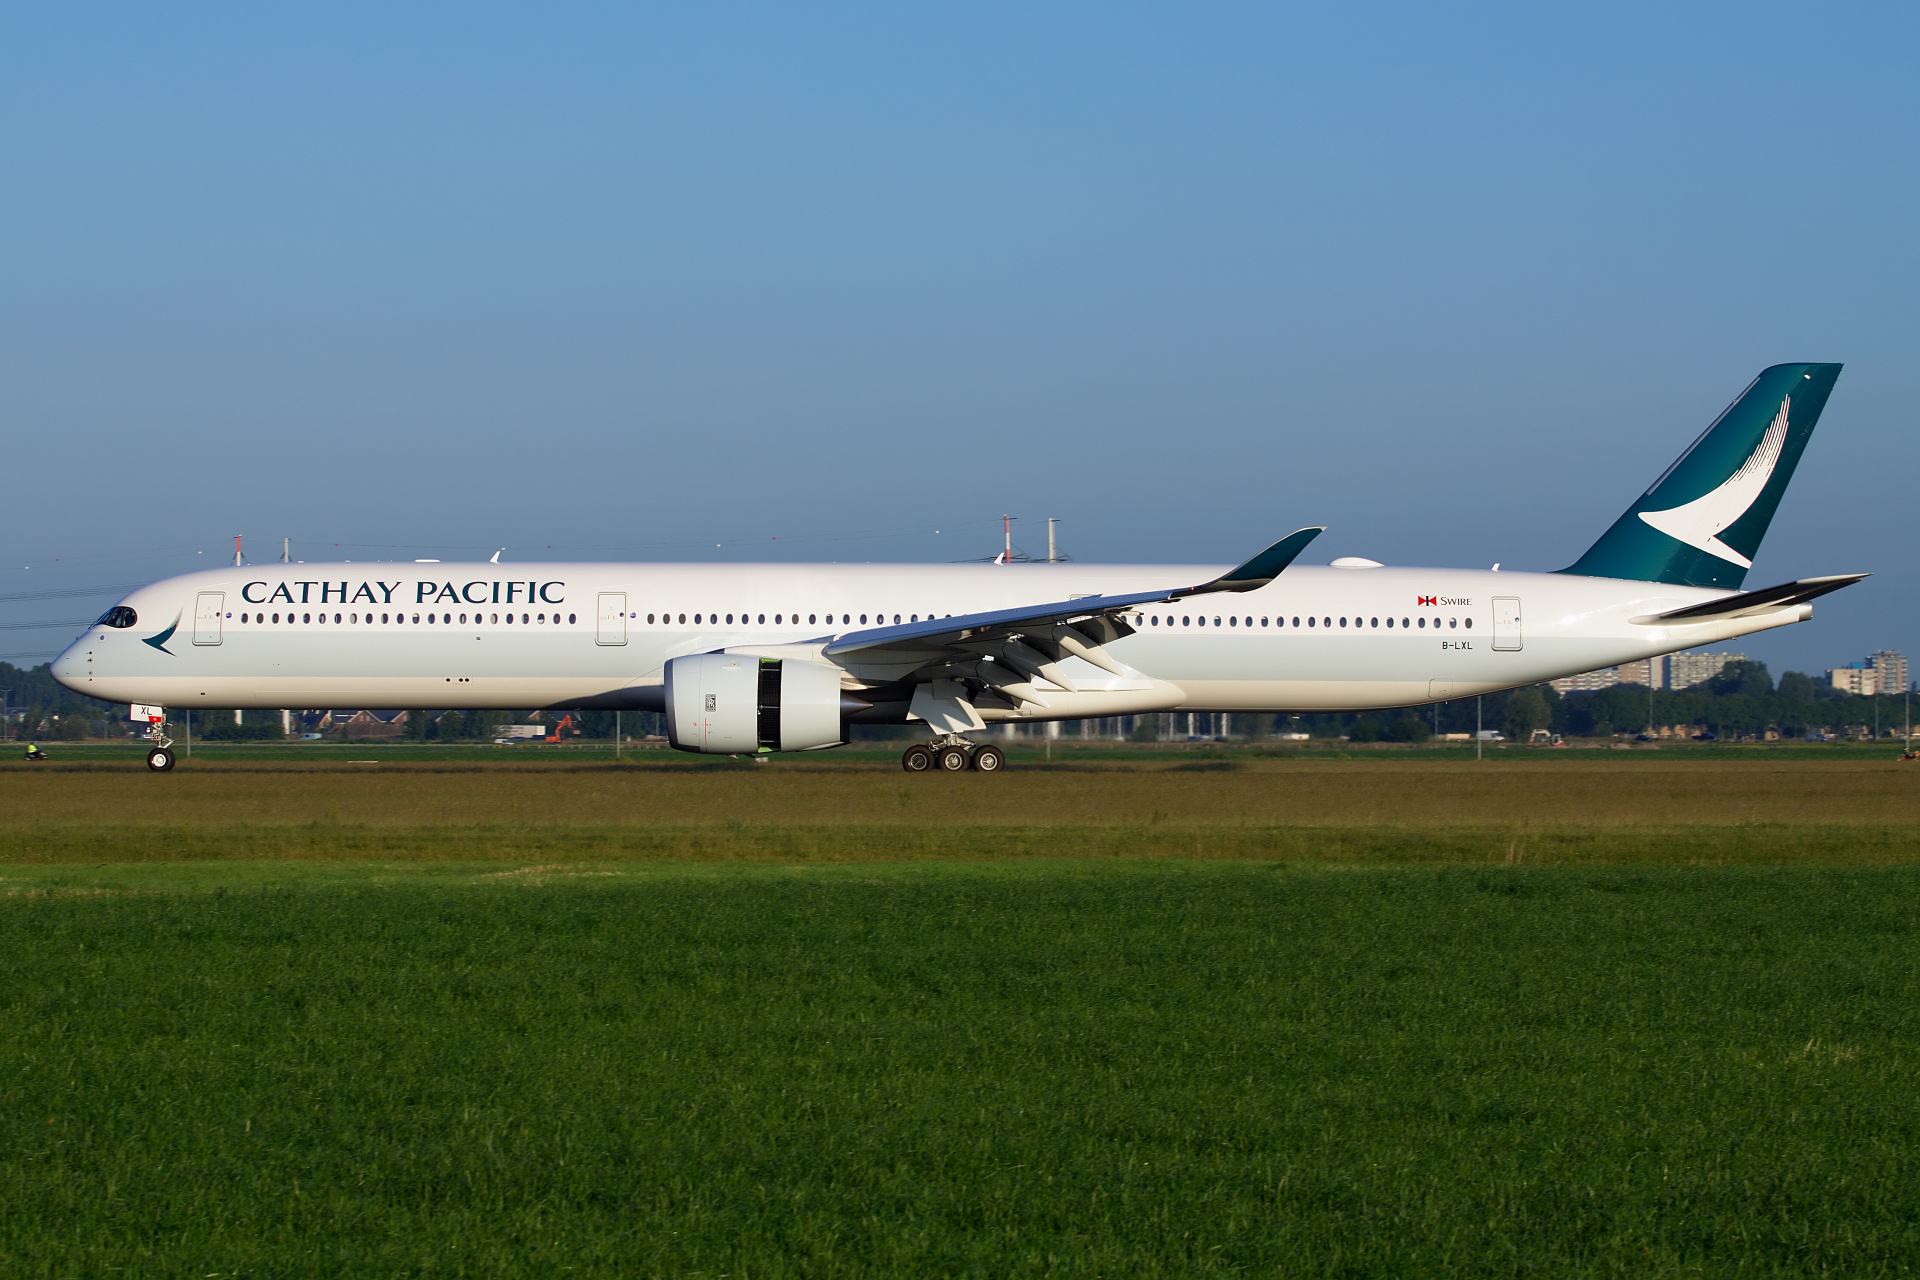 B-LXL, Cathay Pacific (Aircraft » Schiphol Spotting » Airbus A350-1000)